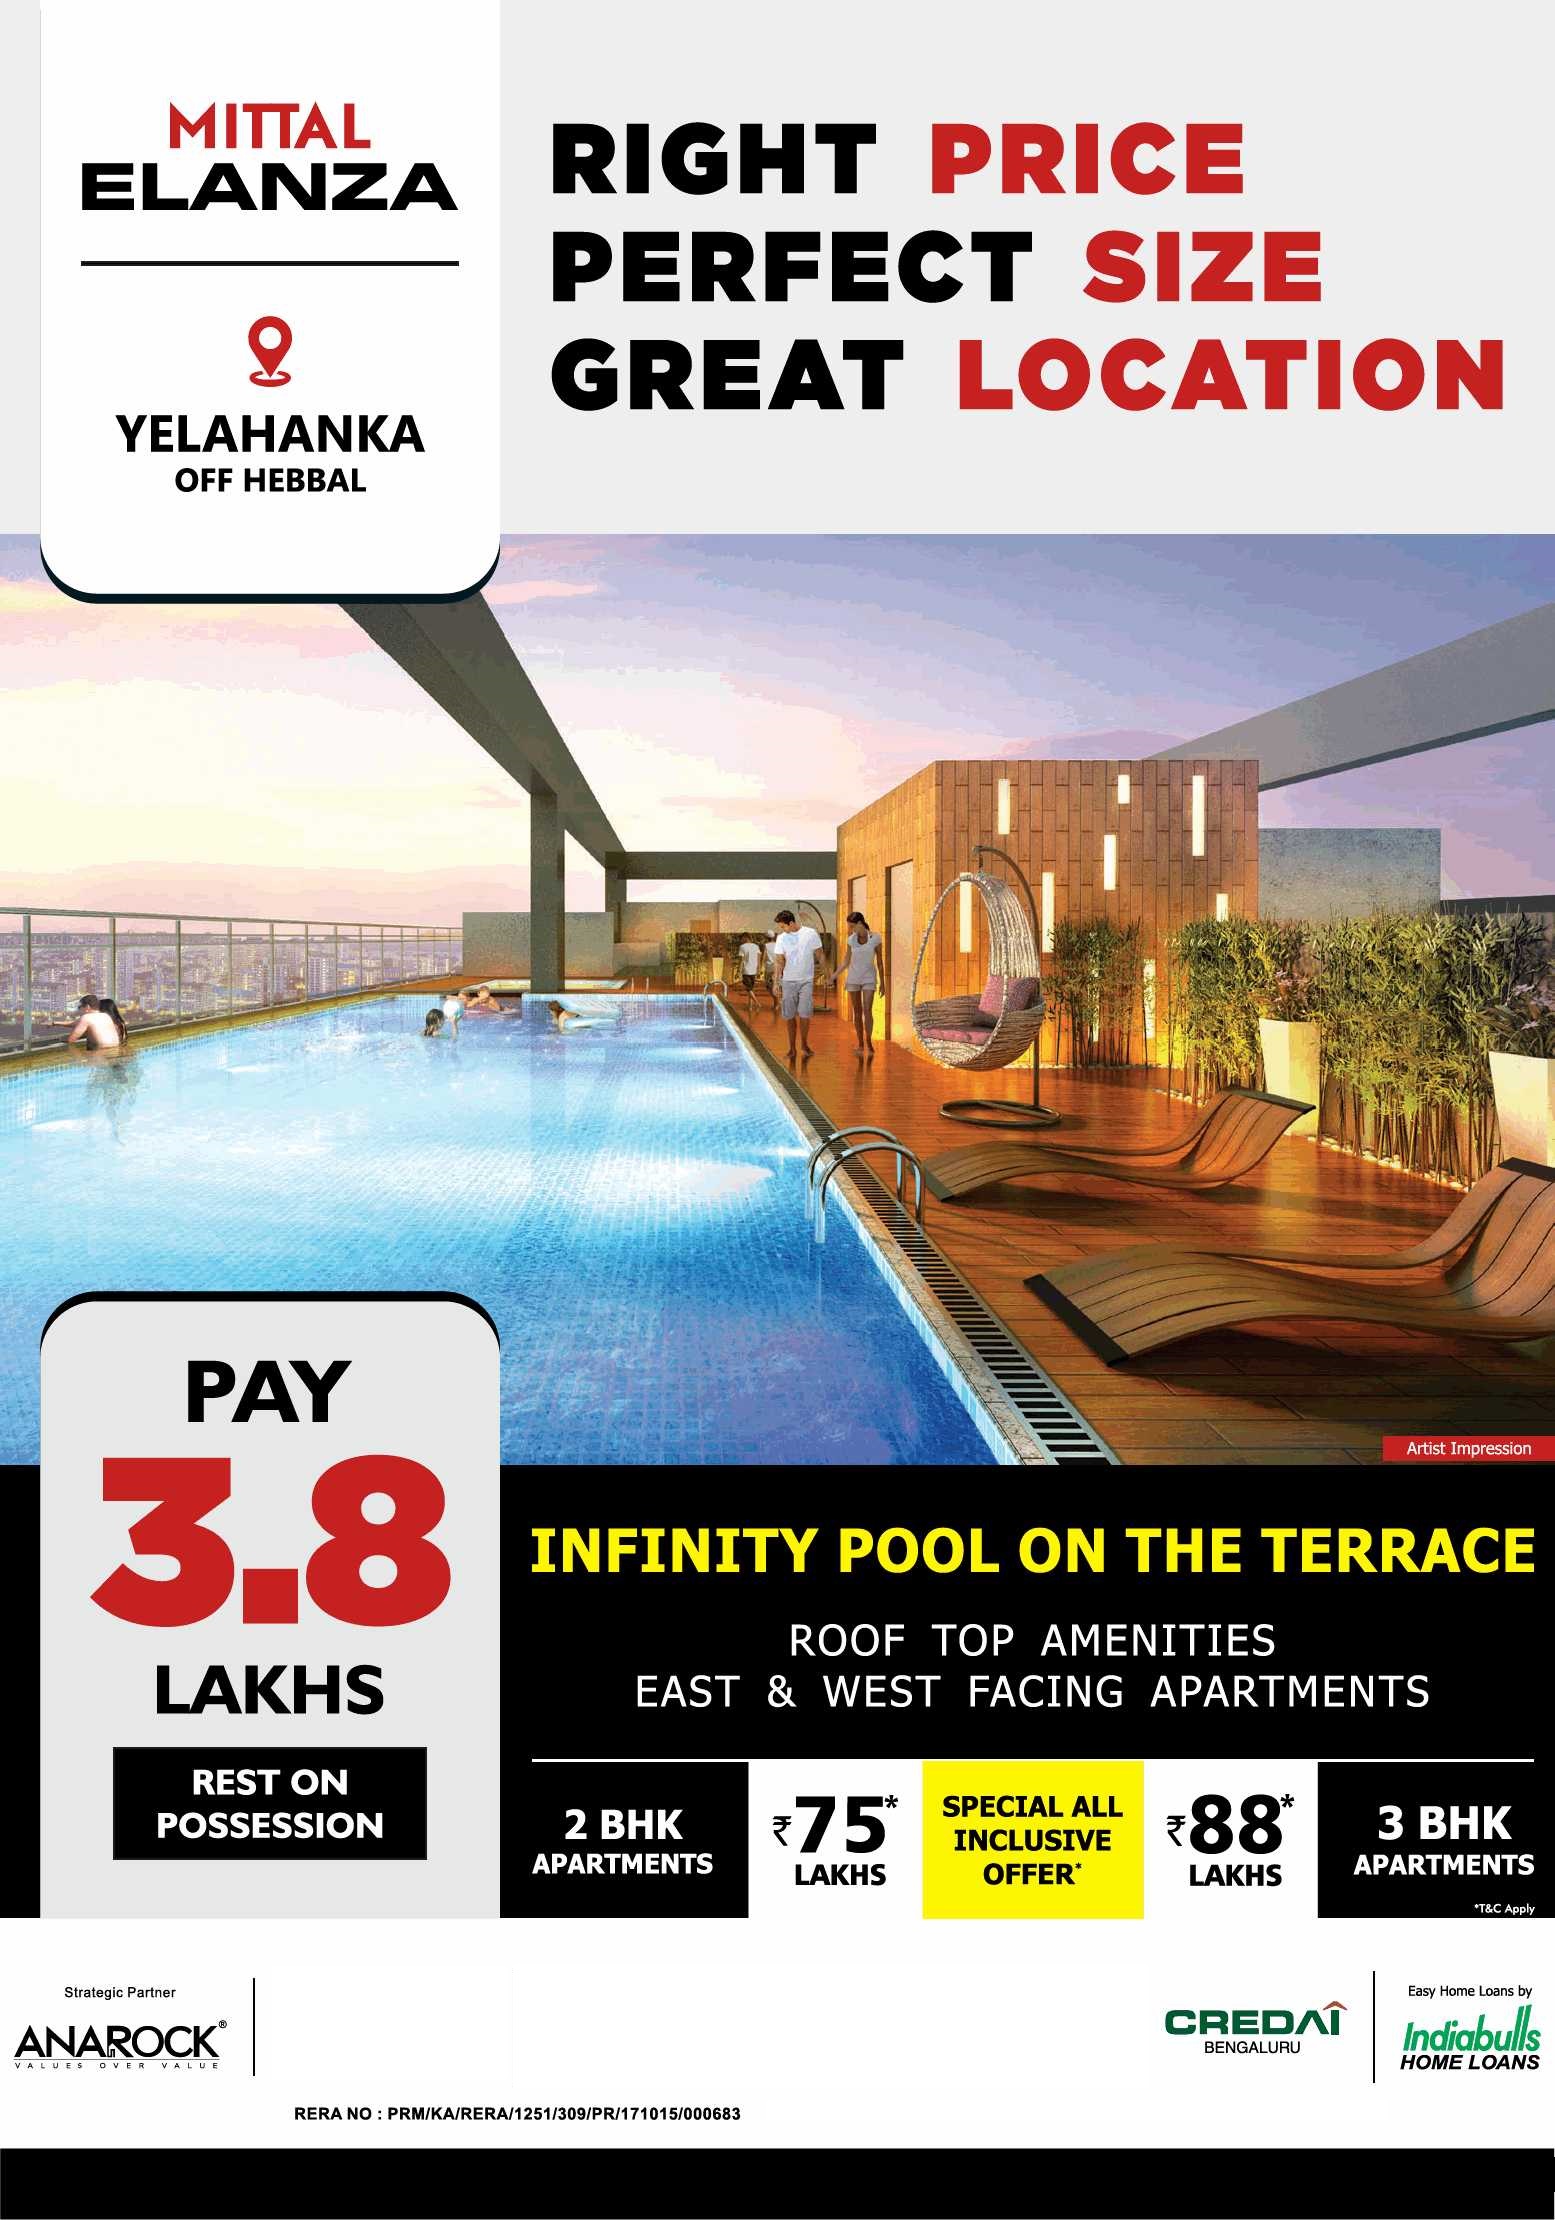 Book apartments with infinity pool on the terrace at Mittal Elanza in  Bangalore Update